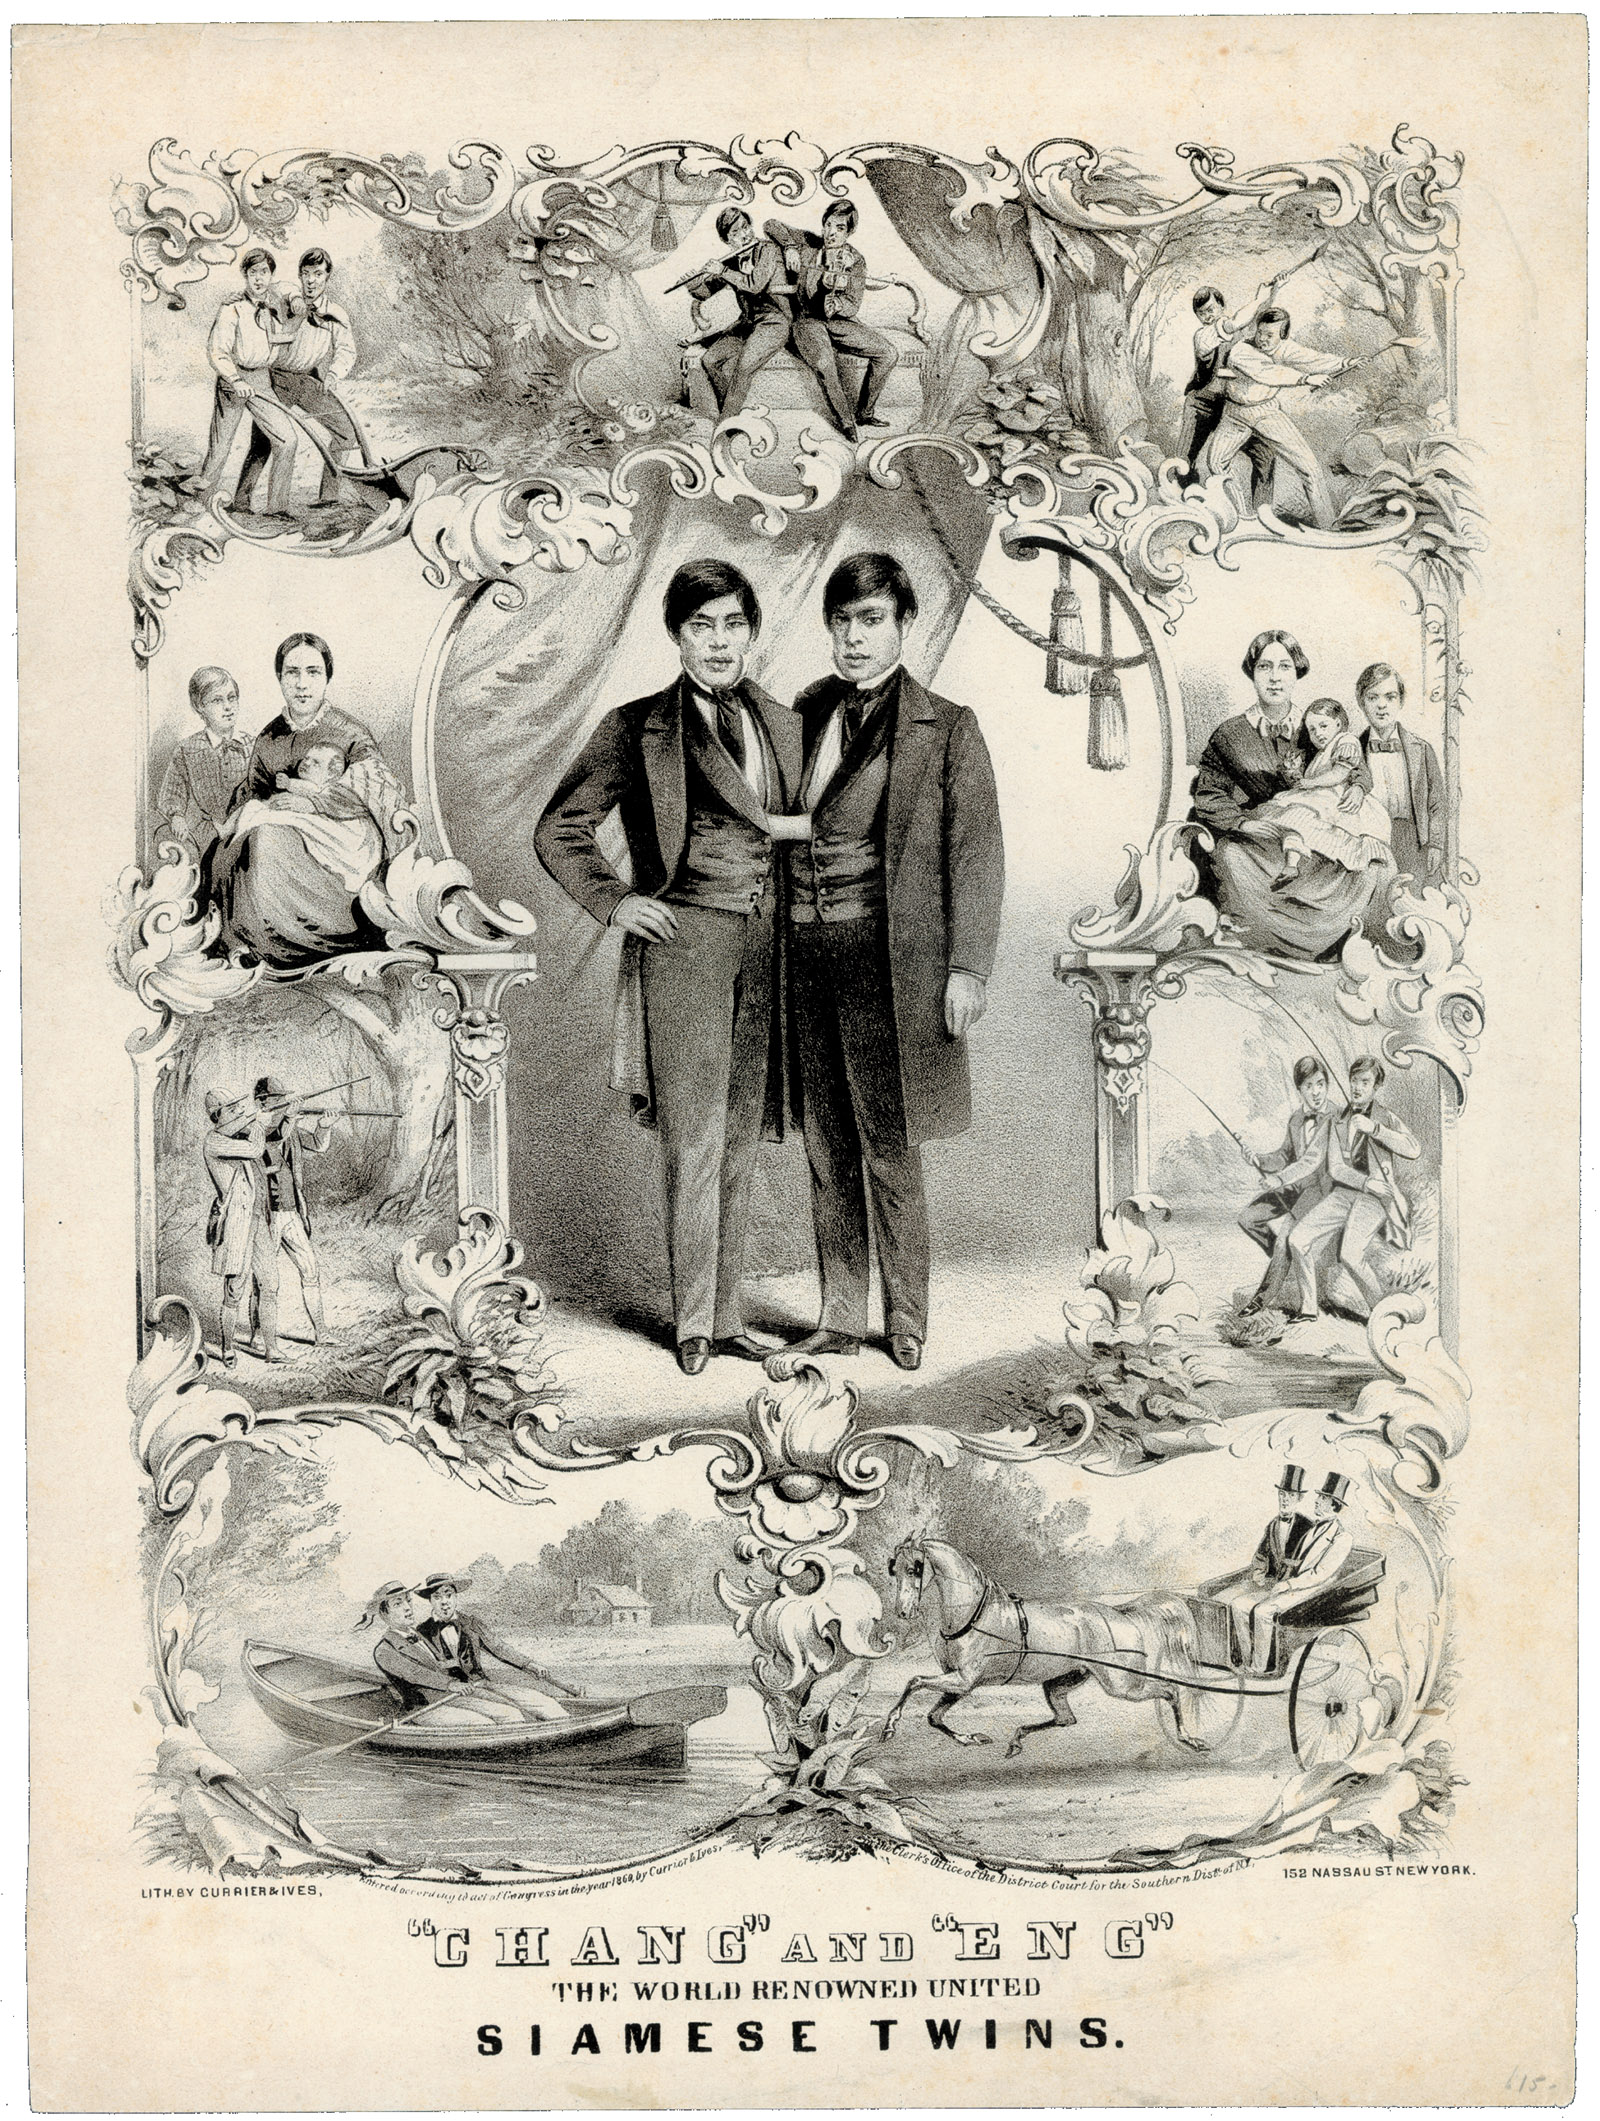 A lithograph of the Siamese twins Chang and Eng, along with their wives and children, 1860